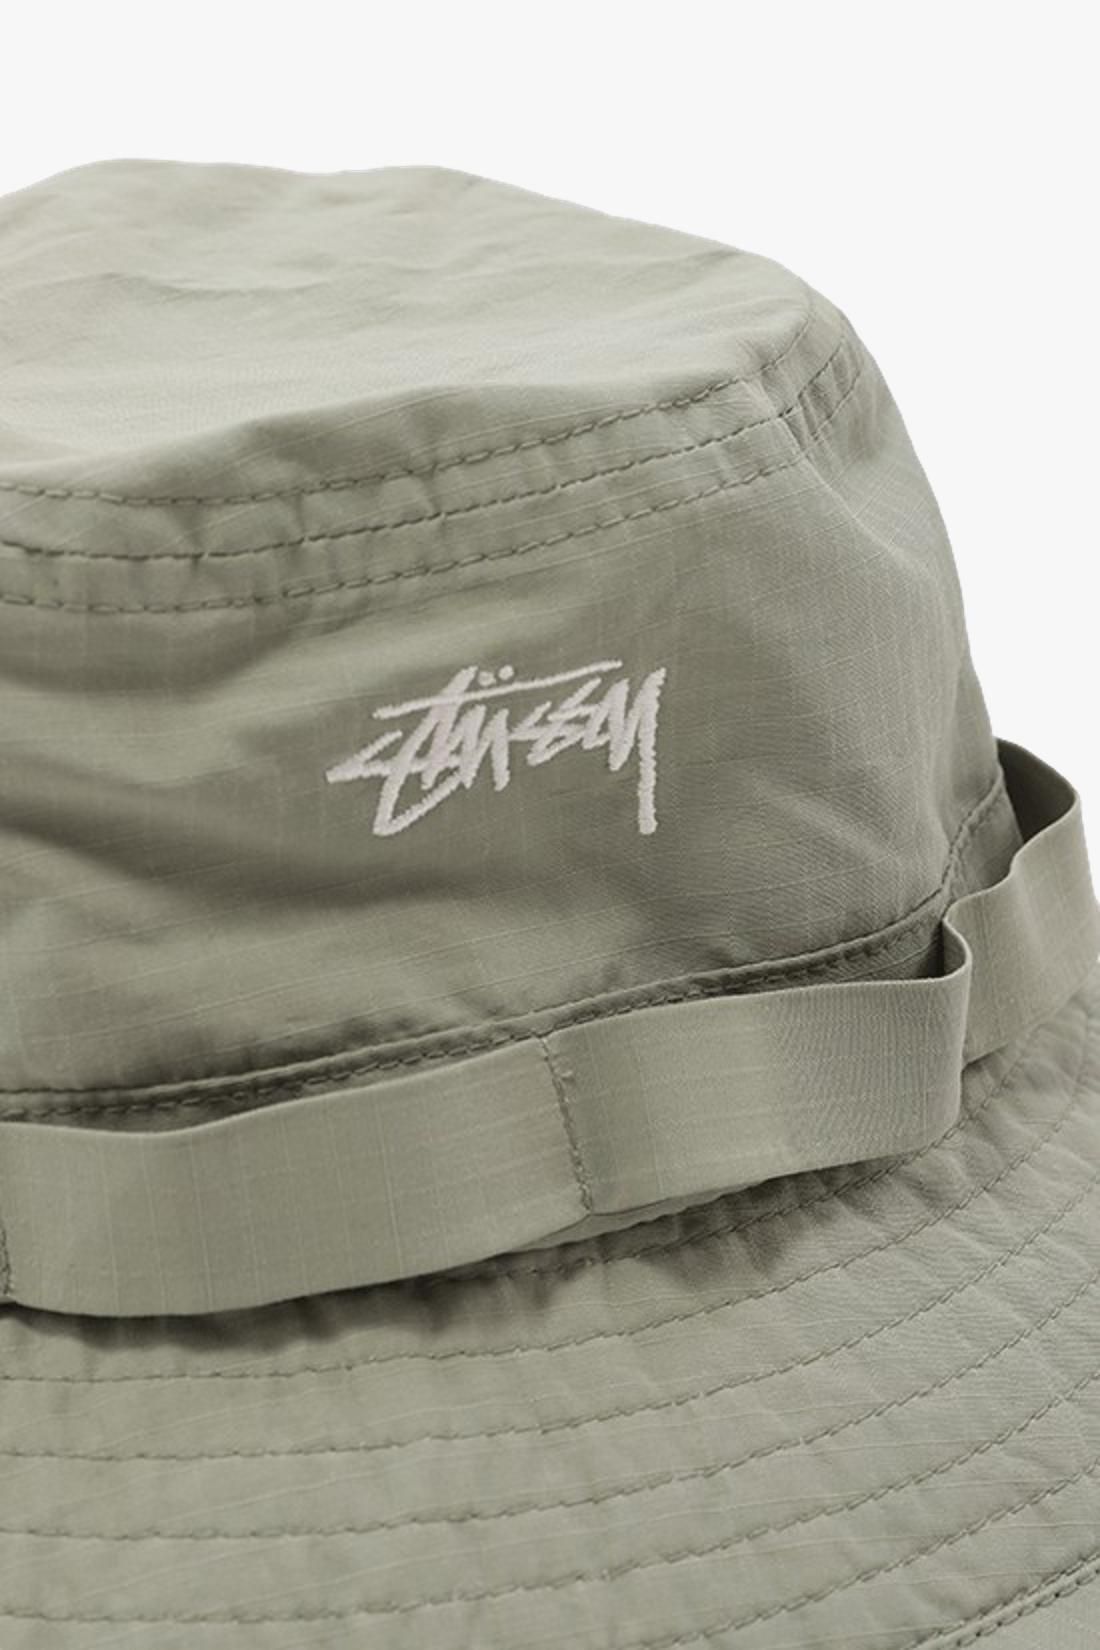 STUSSY / Nyco ripstop boonie hat Sage